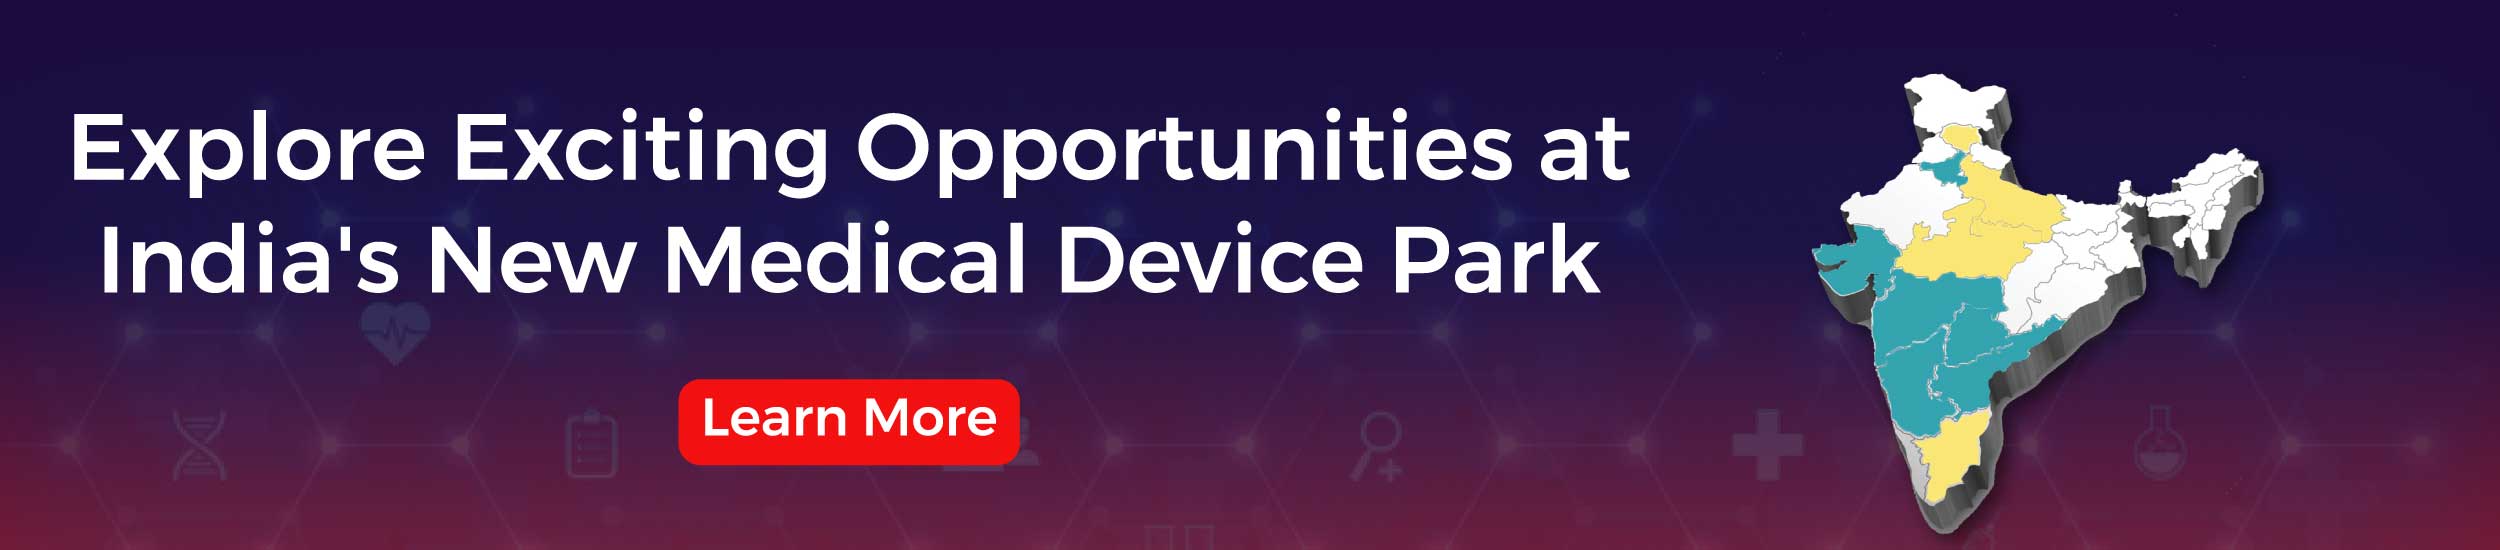 Opportunities at medical device park in India